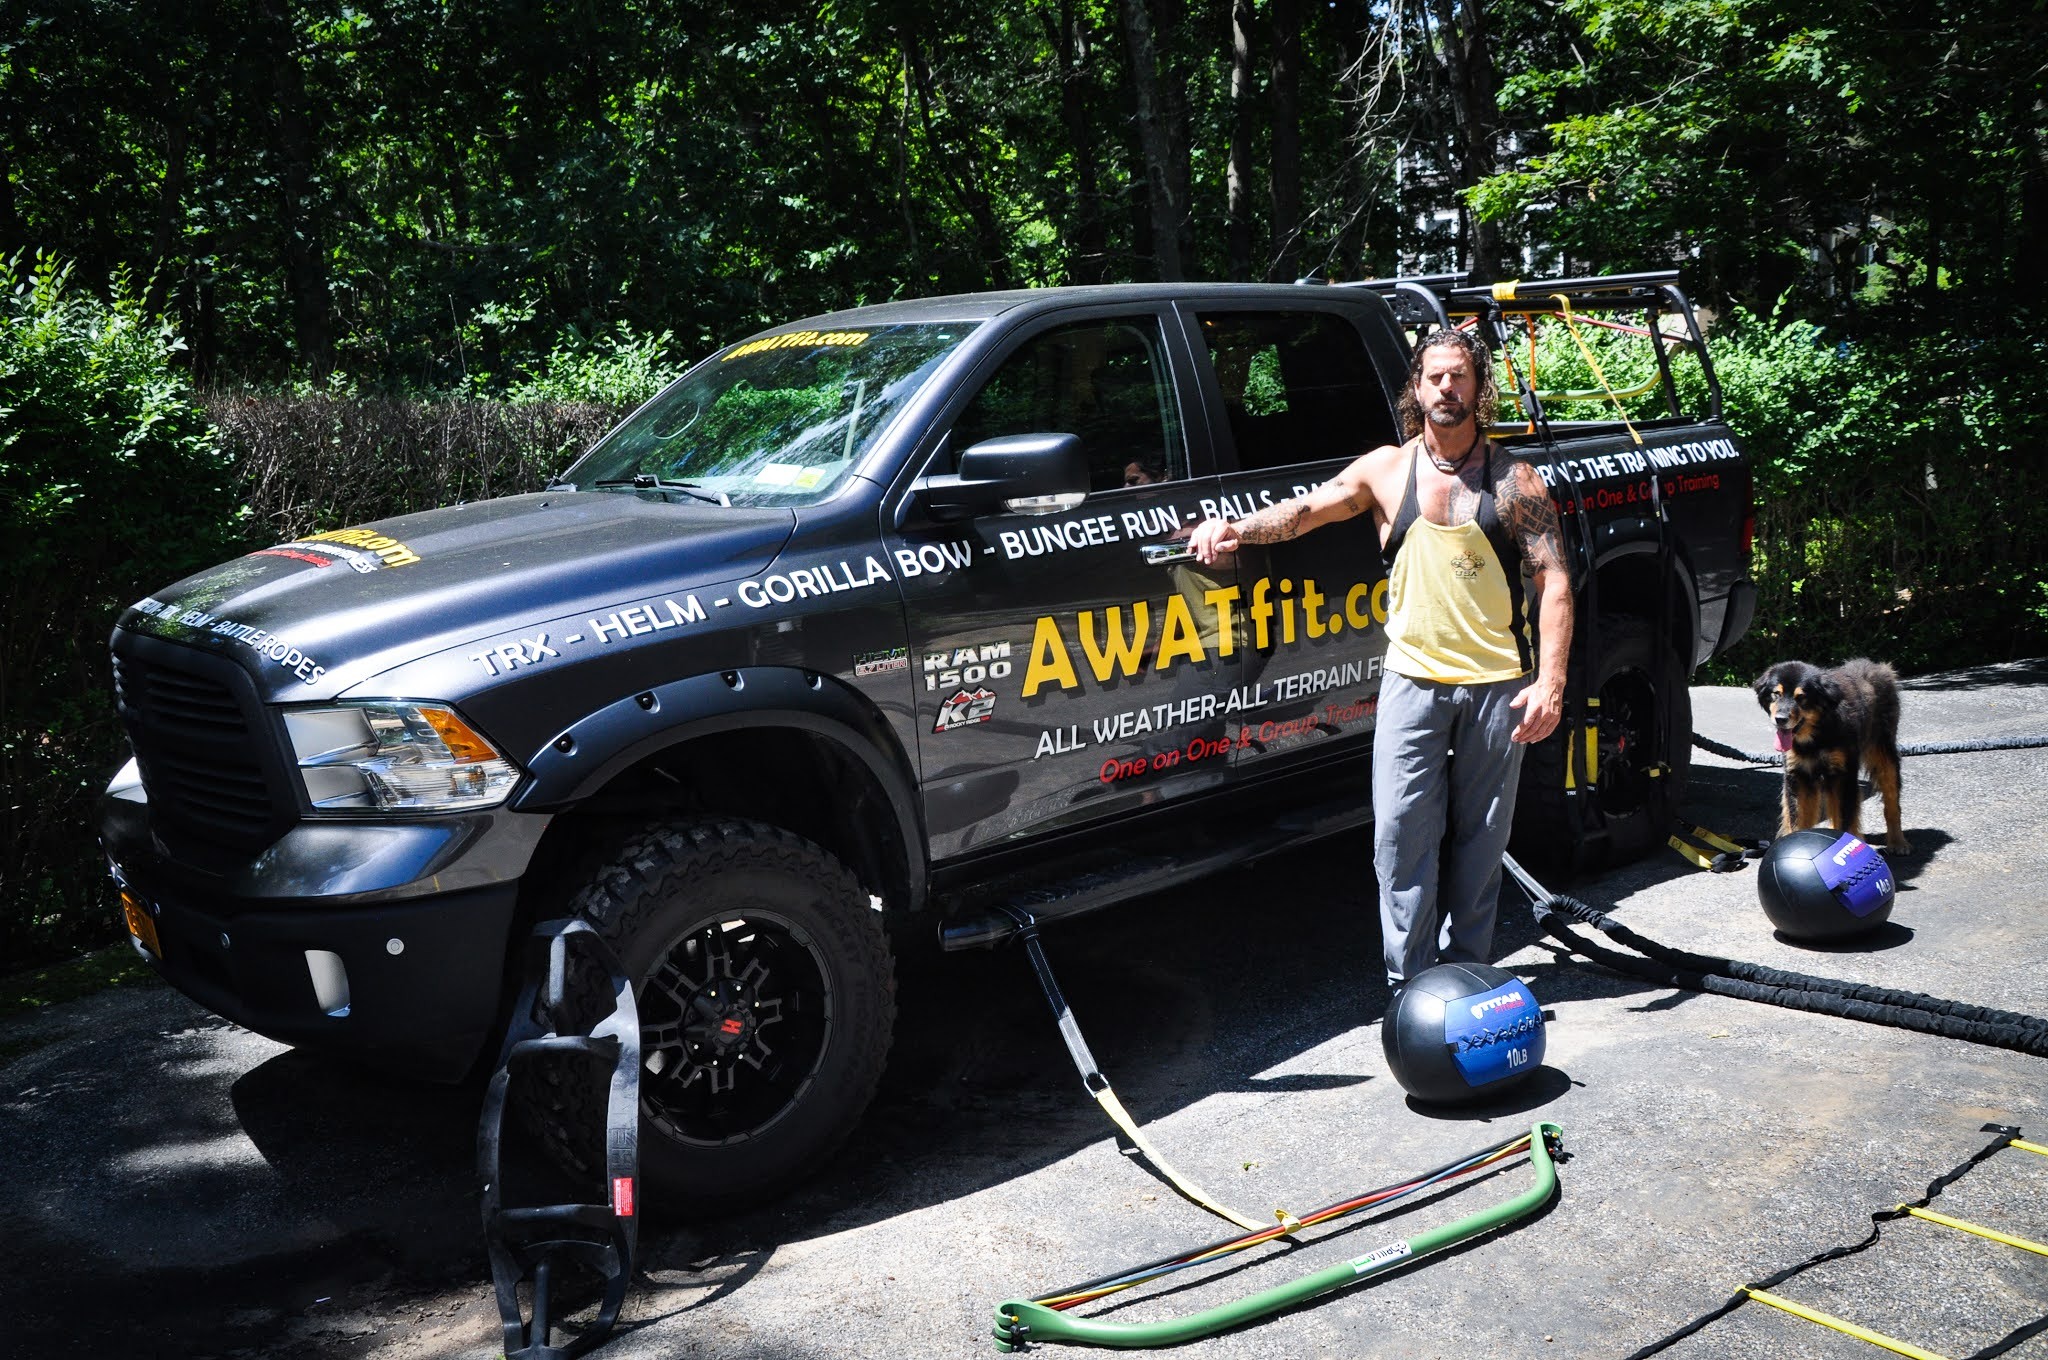 Rich Decker, owner of AWATfit, with one of his mobile gyms. COURTESY AWATfit